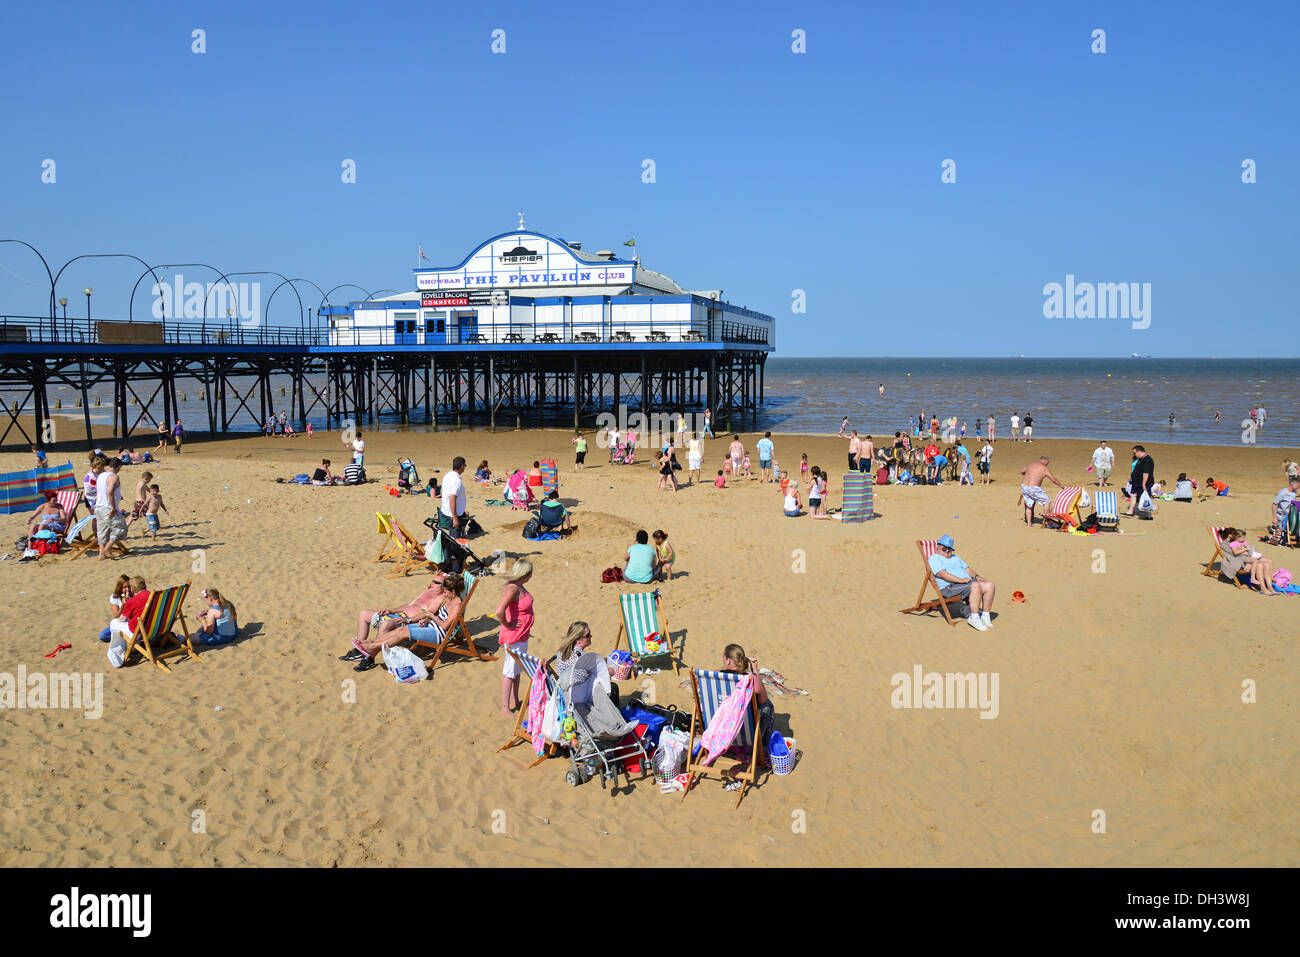 Cleethorpes Beach and Pier, Cleethorpes, Lincolnshire, England, United Kingdom Stock Photo